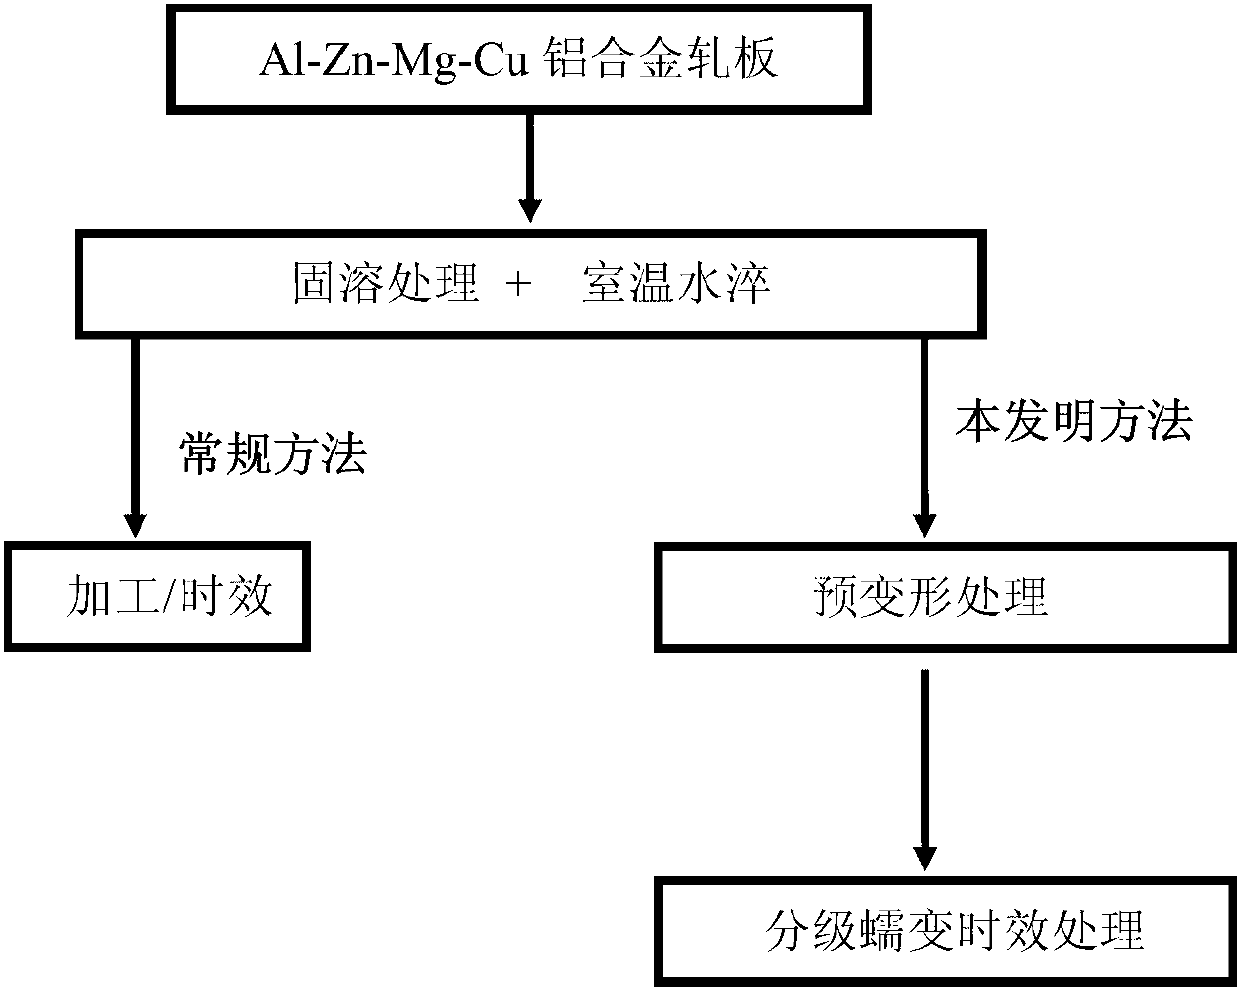 Method for multilevel creep age forming of Al-Zn-Mg-Cu series aluminium alloy plate